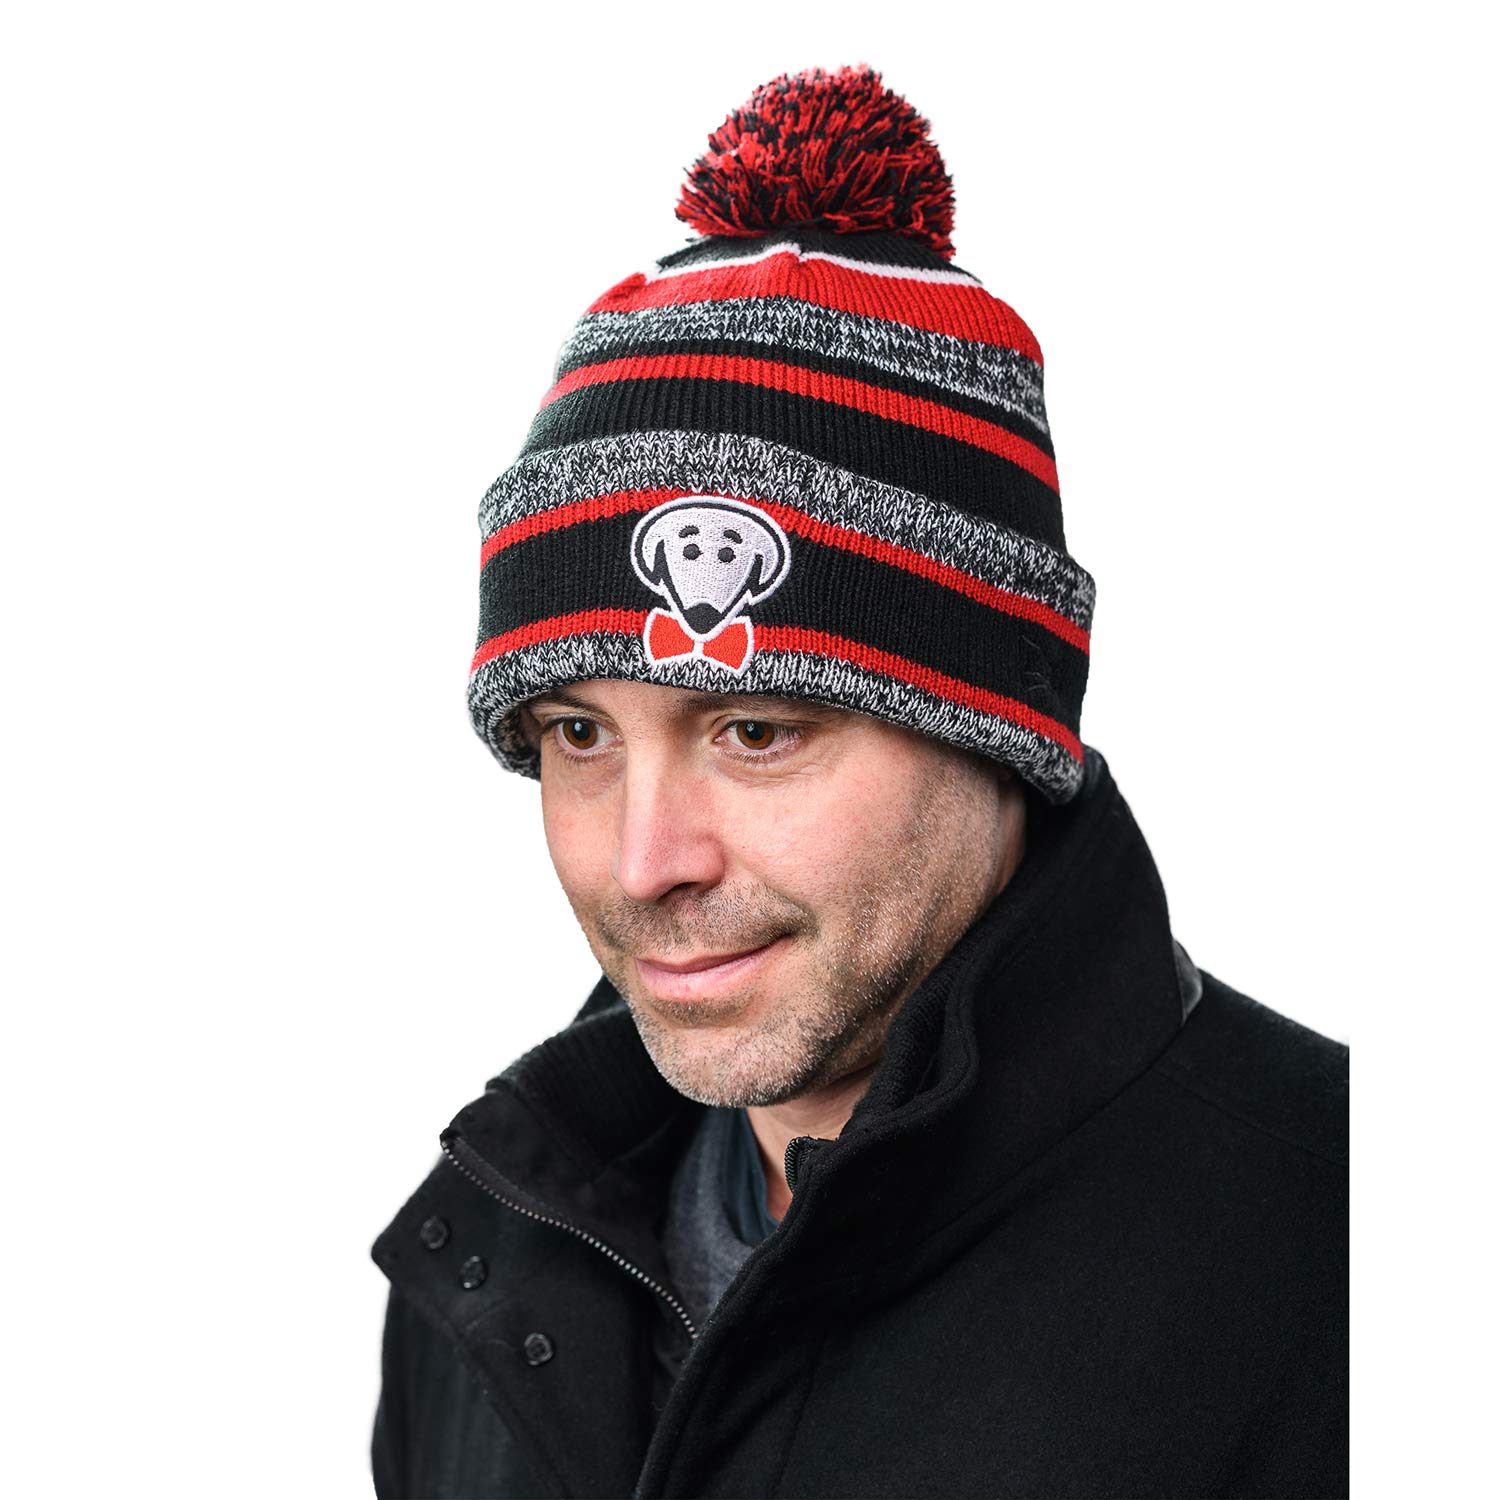 What is he looking at?! Wouldn't you like to know! - Mosi winter knit hat by Beau Tyler